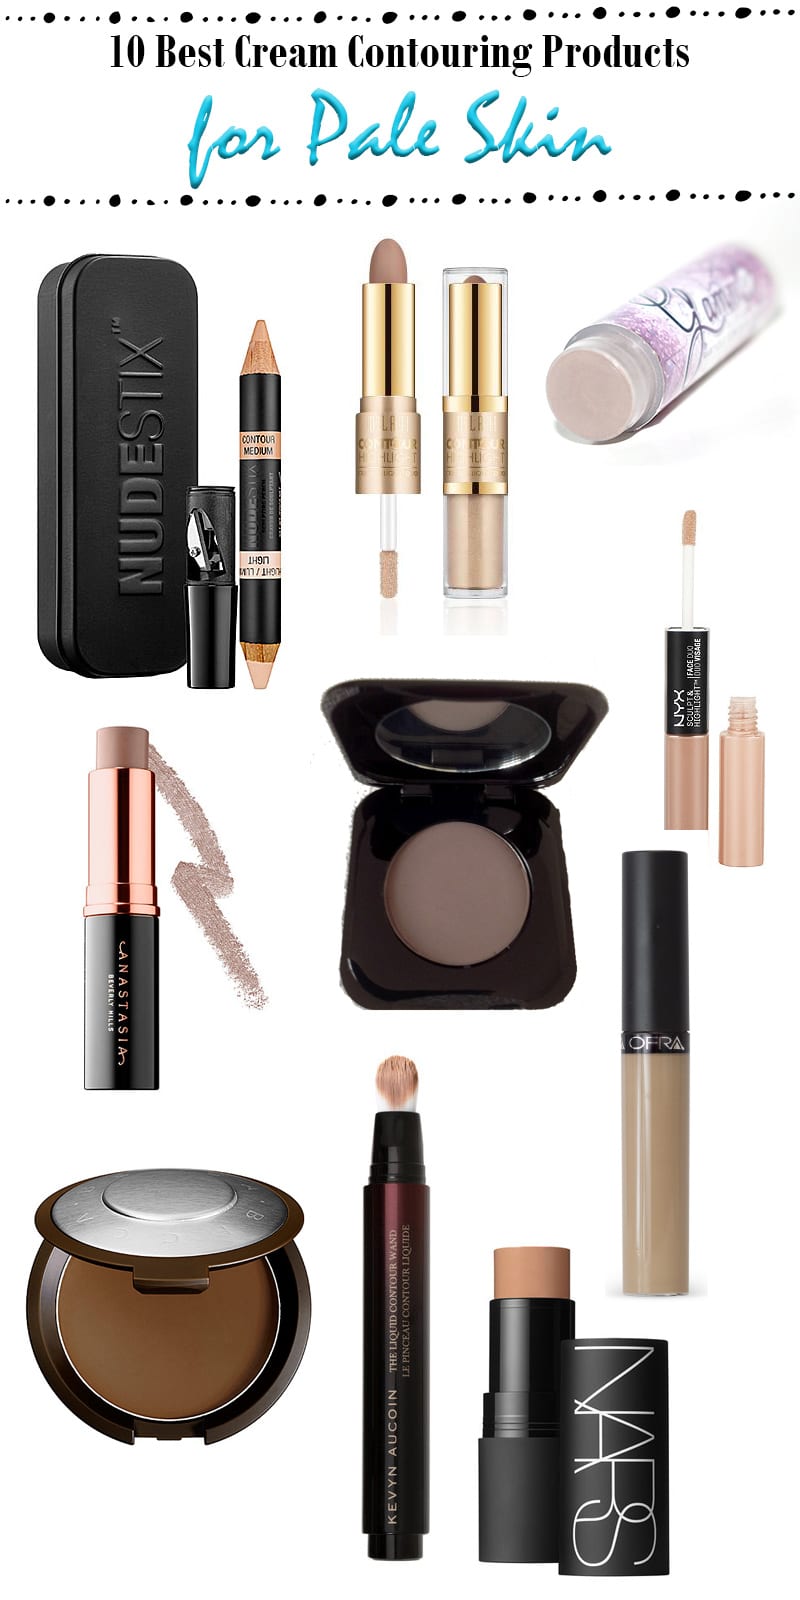 Top 10 Cream Contouring Products for Pale Skin